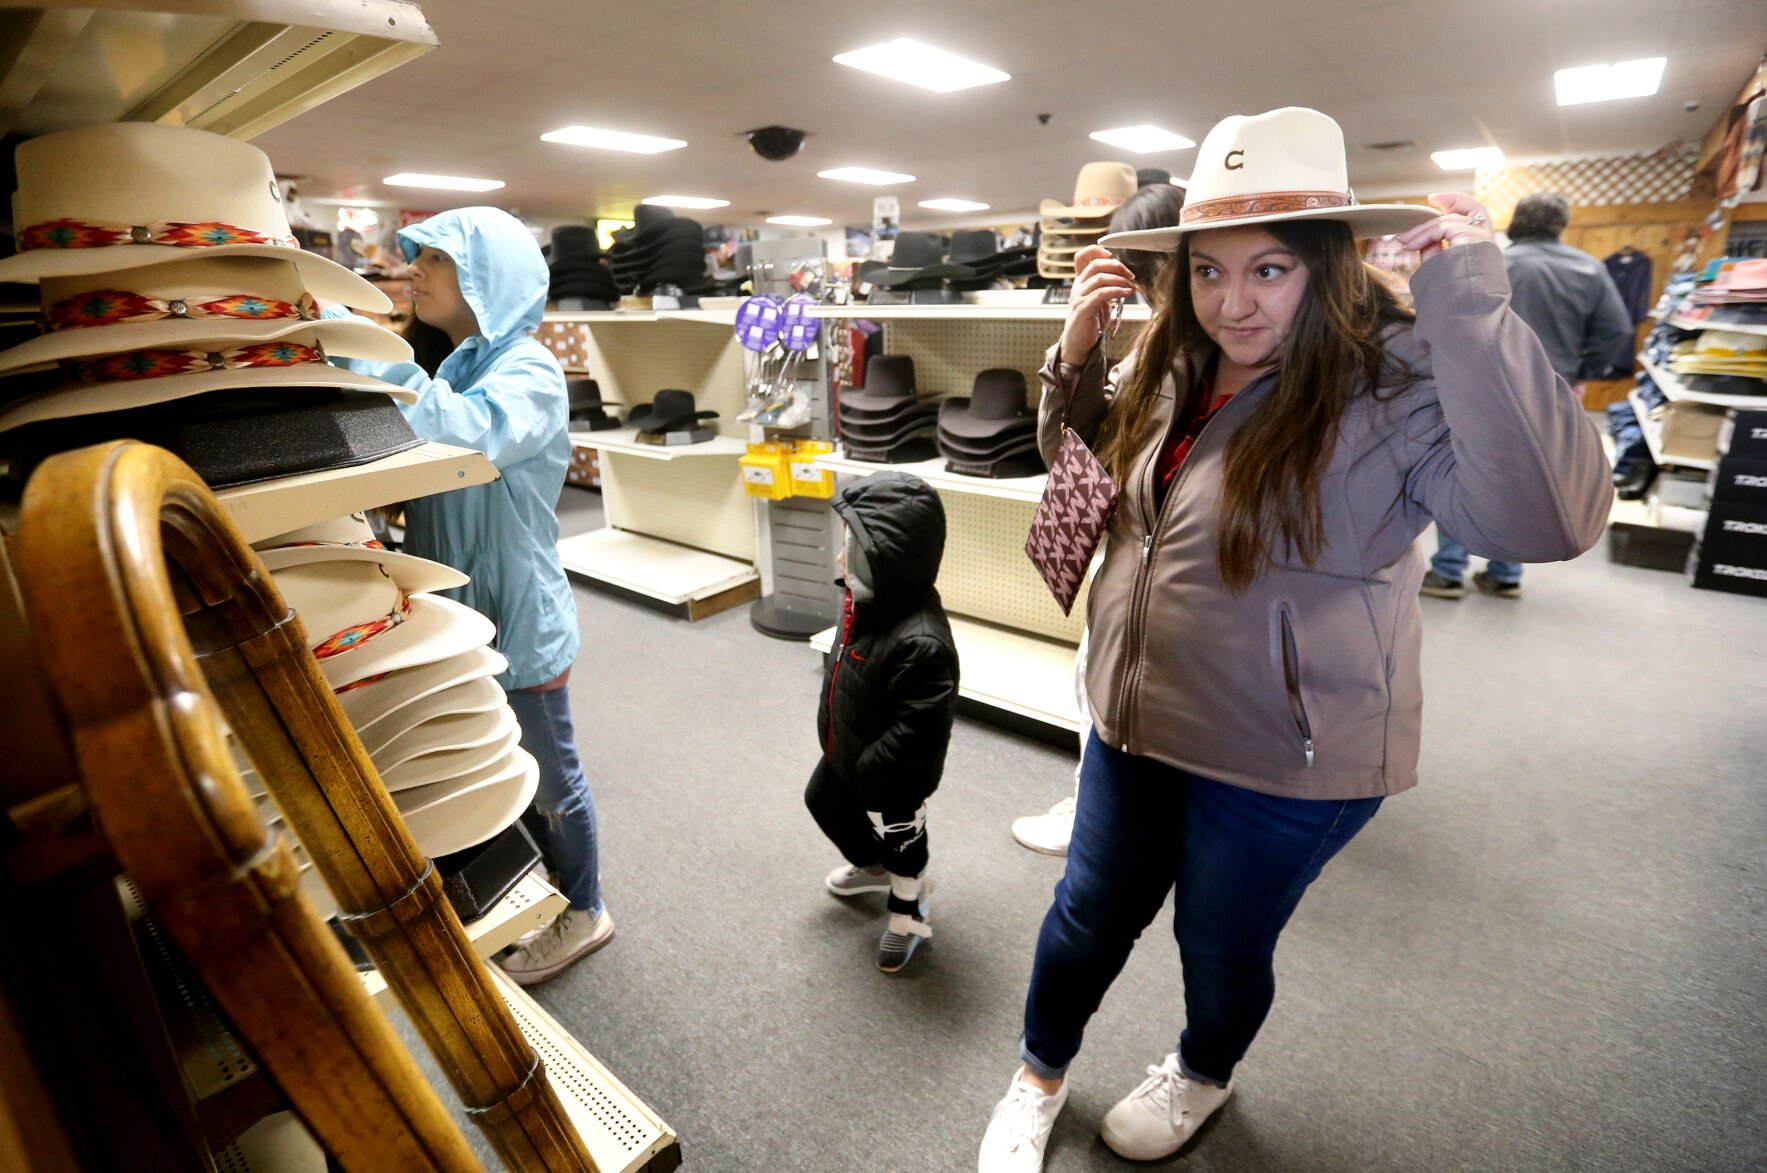 Irene Schaefer, of Johnson Creek, Wis., shops for hats at Longhorn Saddlery and Western Wear in Dubuque. The store offers shoppers a taste of classic Western charm.    PHOTO CREDIT: JESSICA REILLY